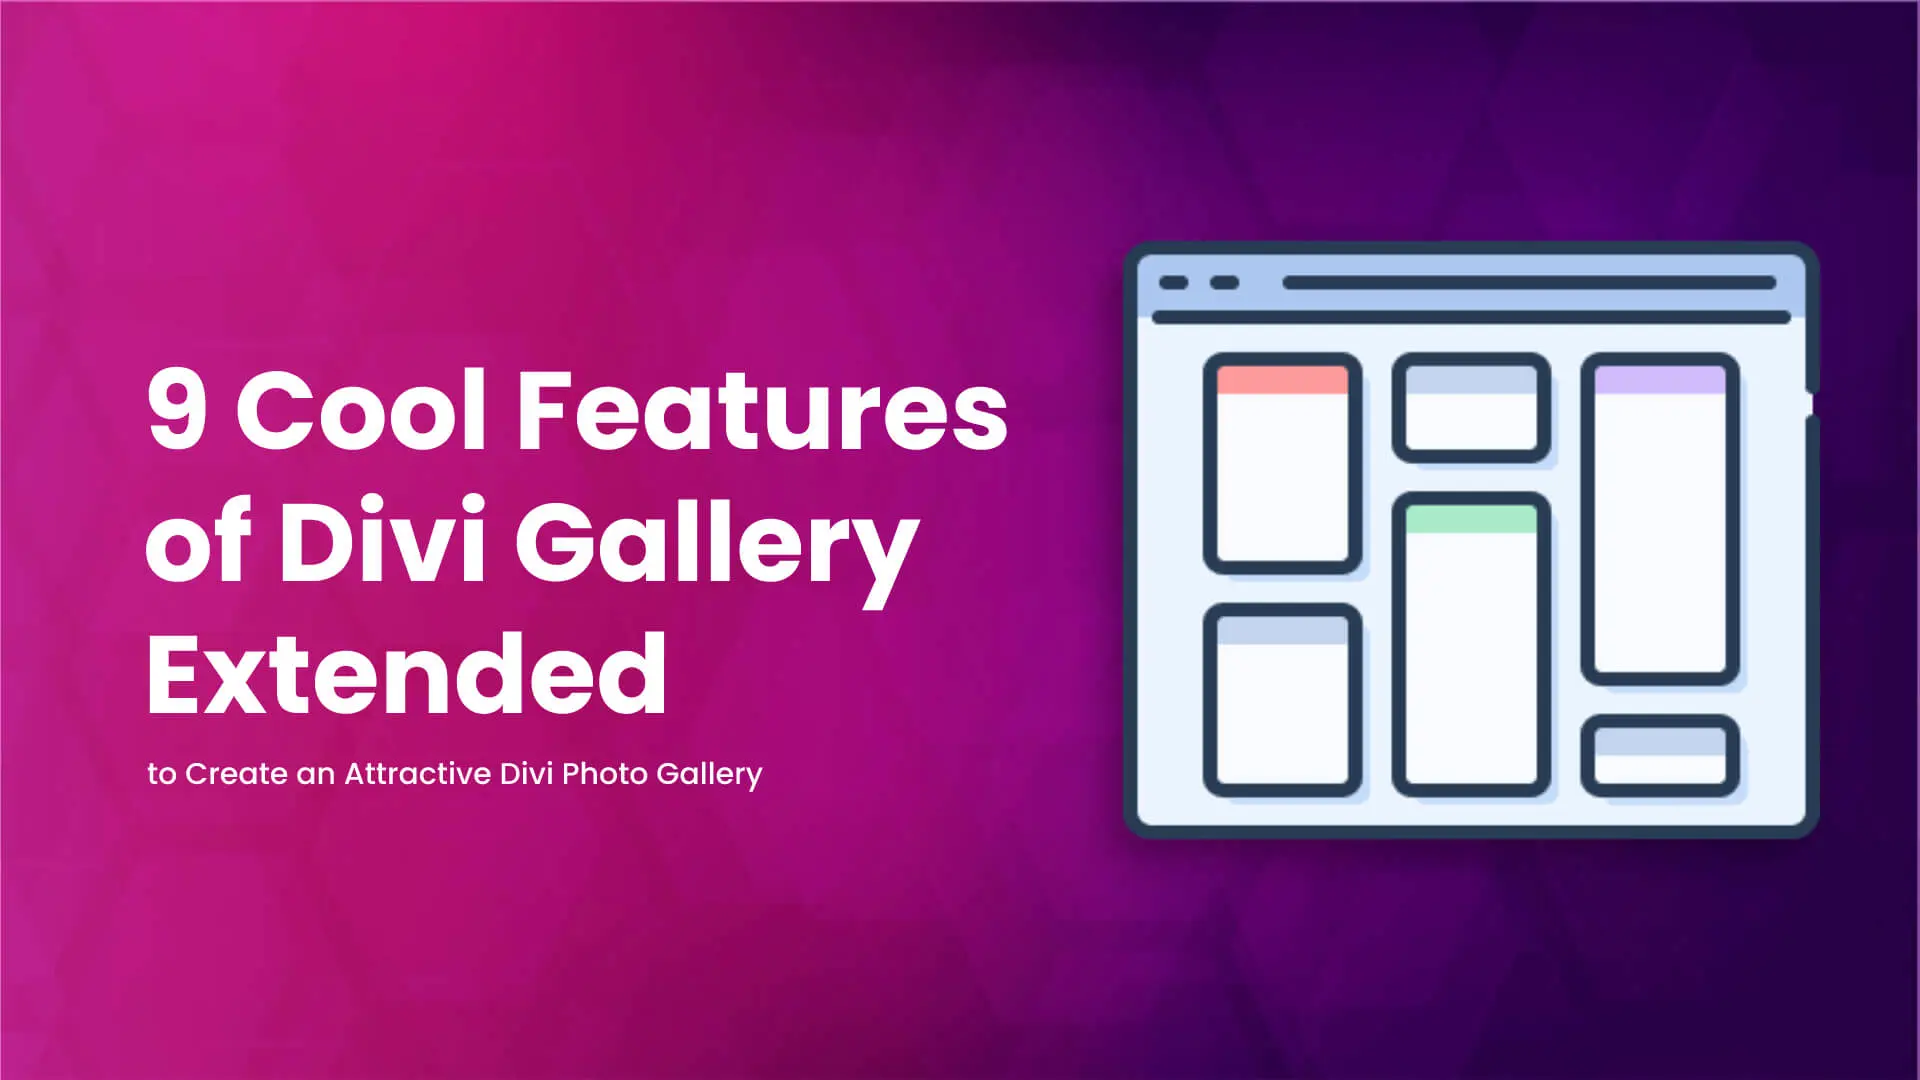 Features of Divi Gallery Extended